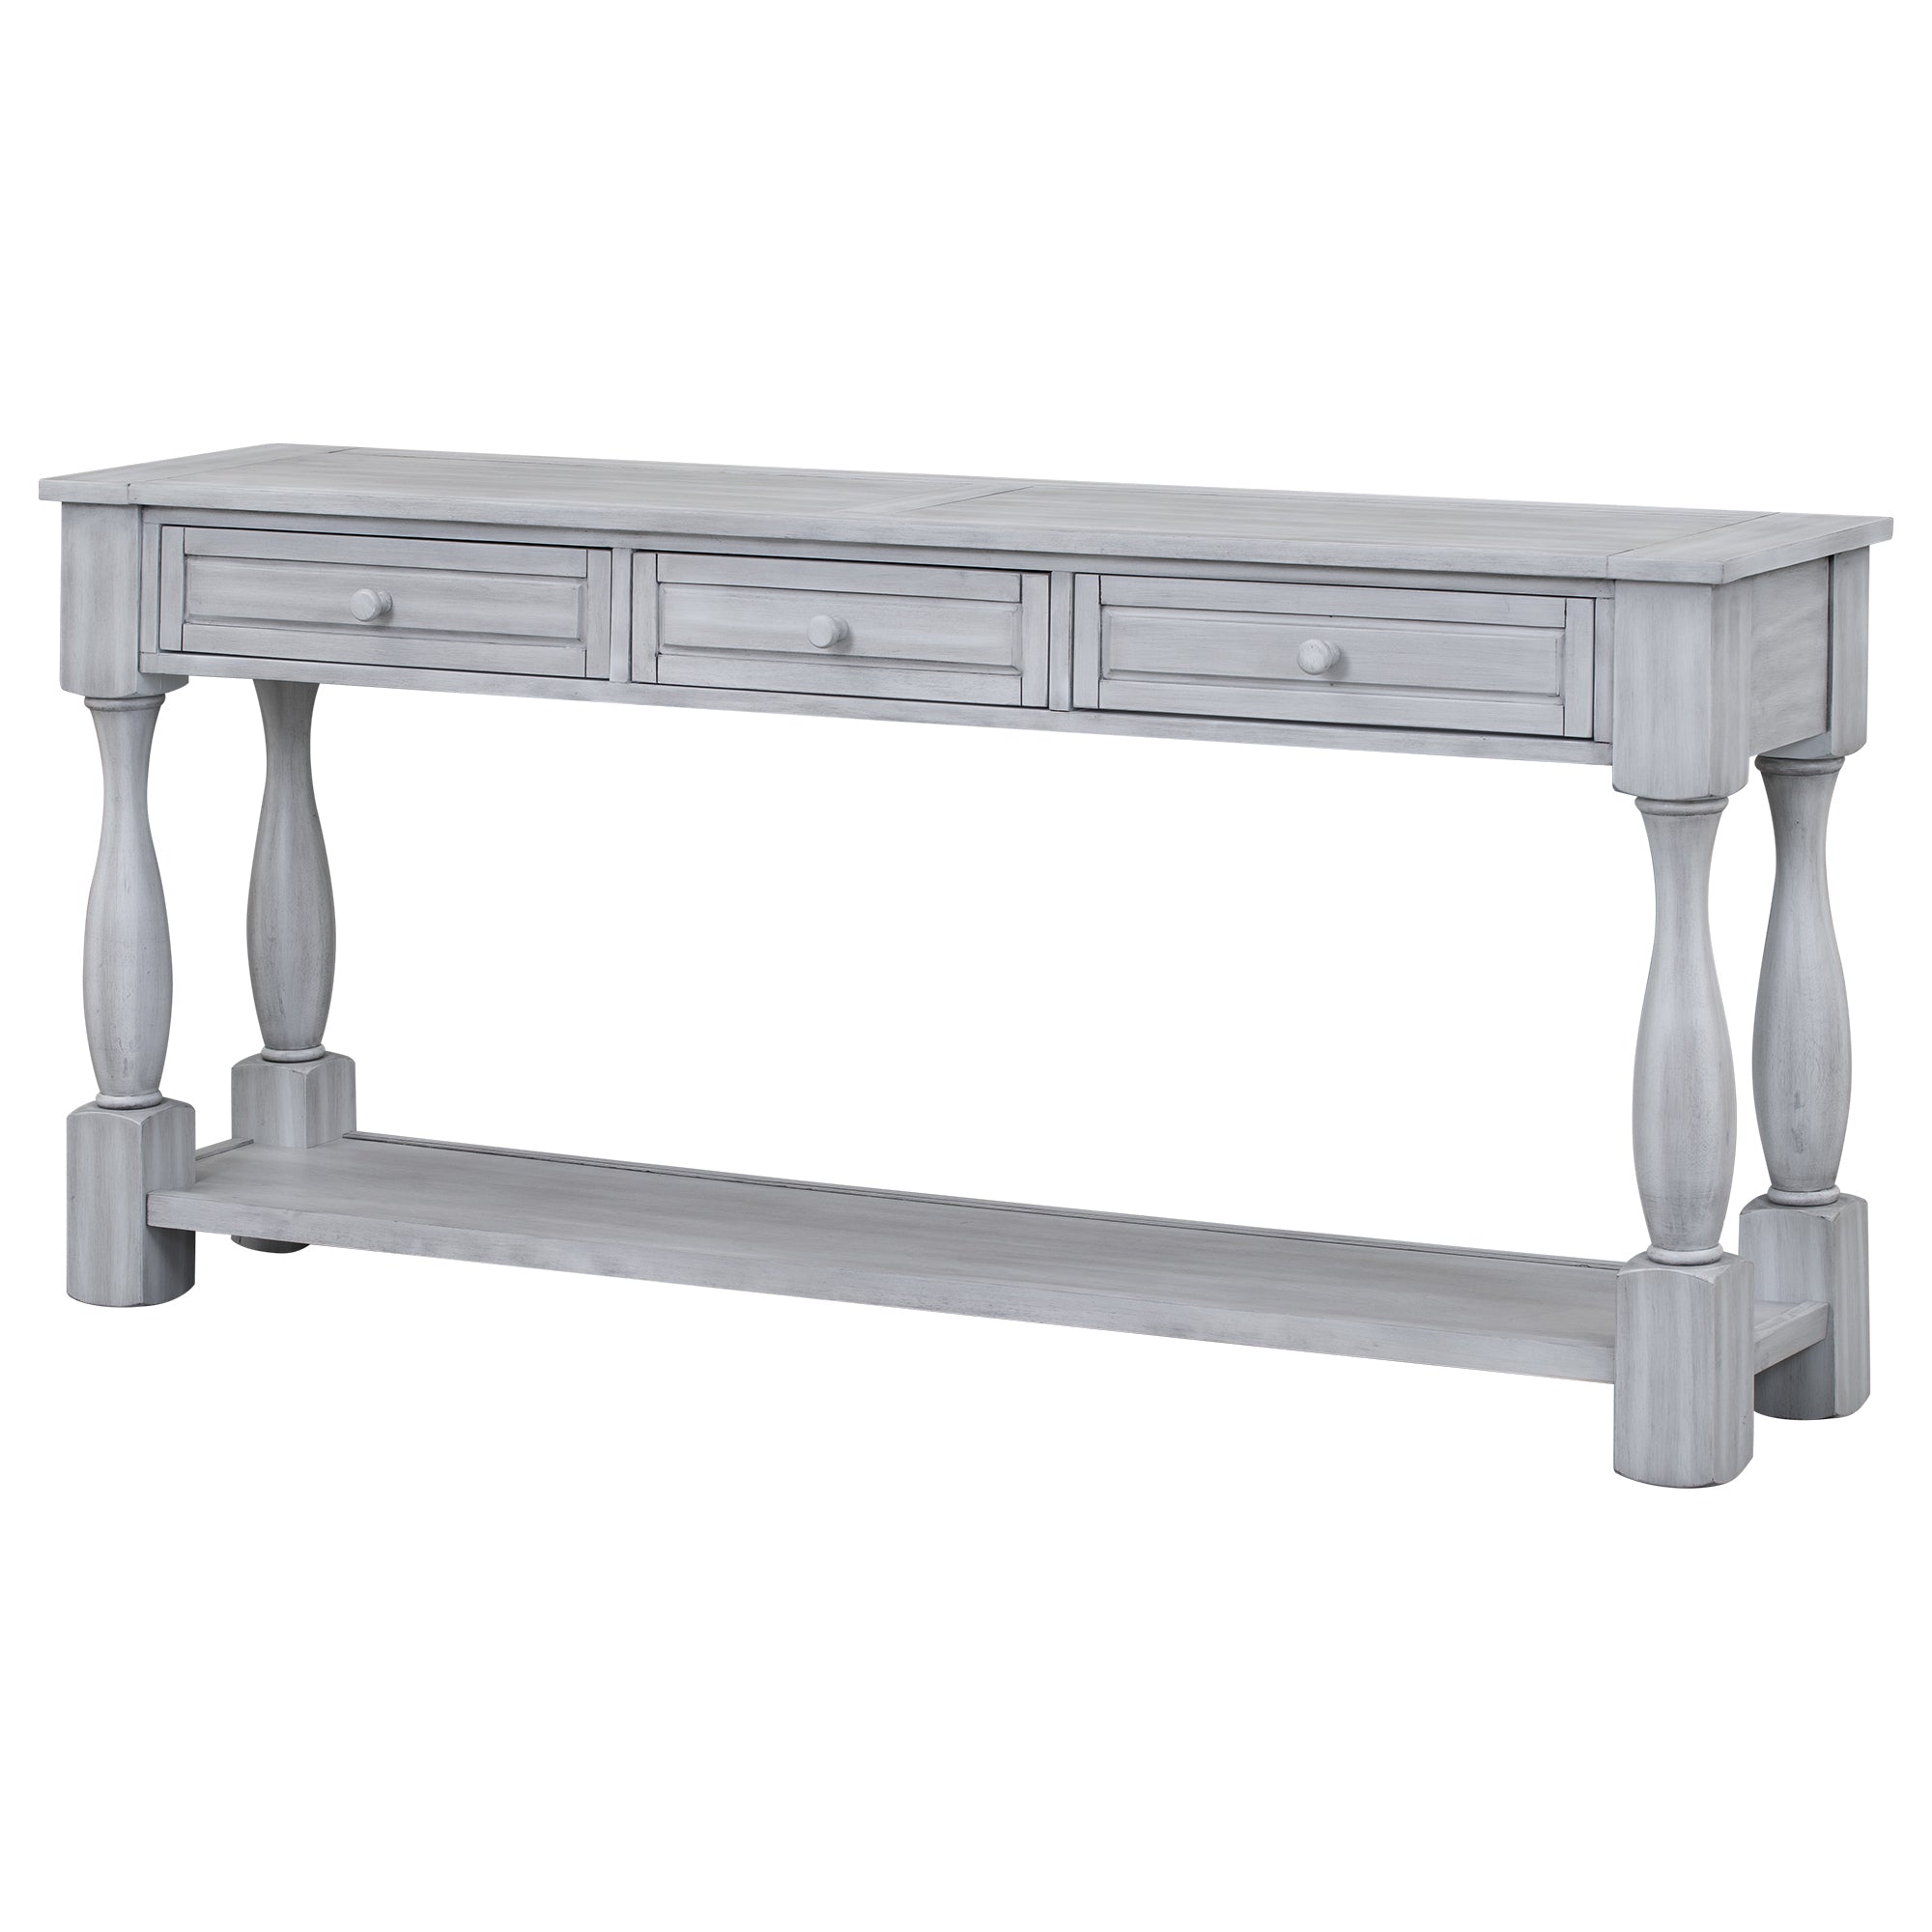 64" Console Entryway Table, Sideboard, Light Gray Color